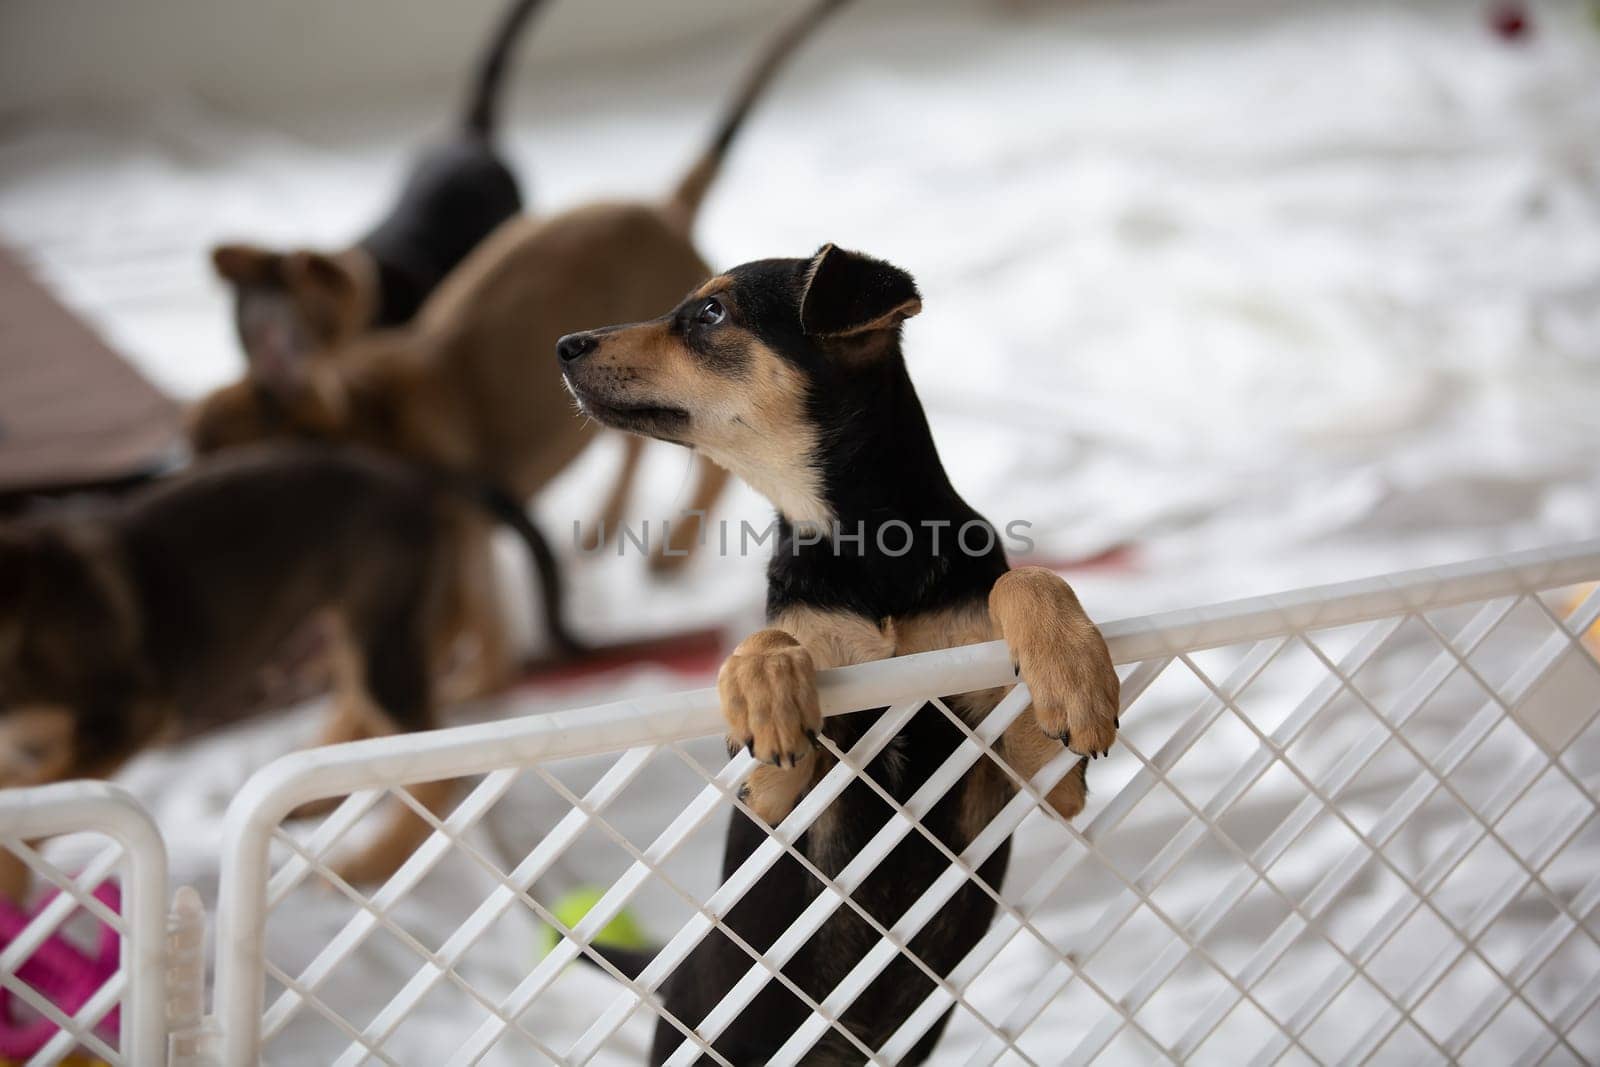 Sad puppy in shelter behind fence waiting to be rescued and adopted to new home. Shelter for animals concept